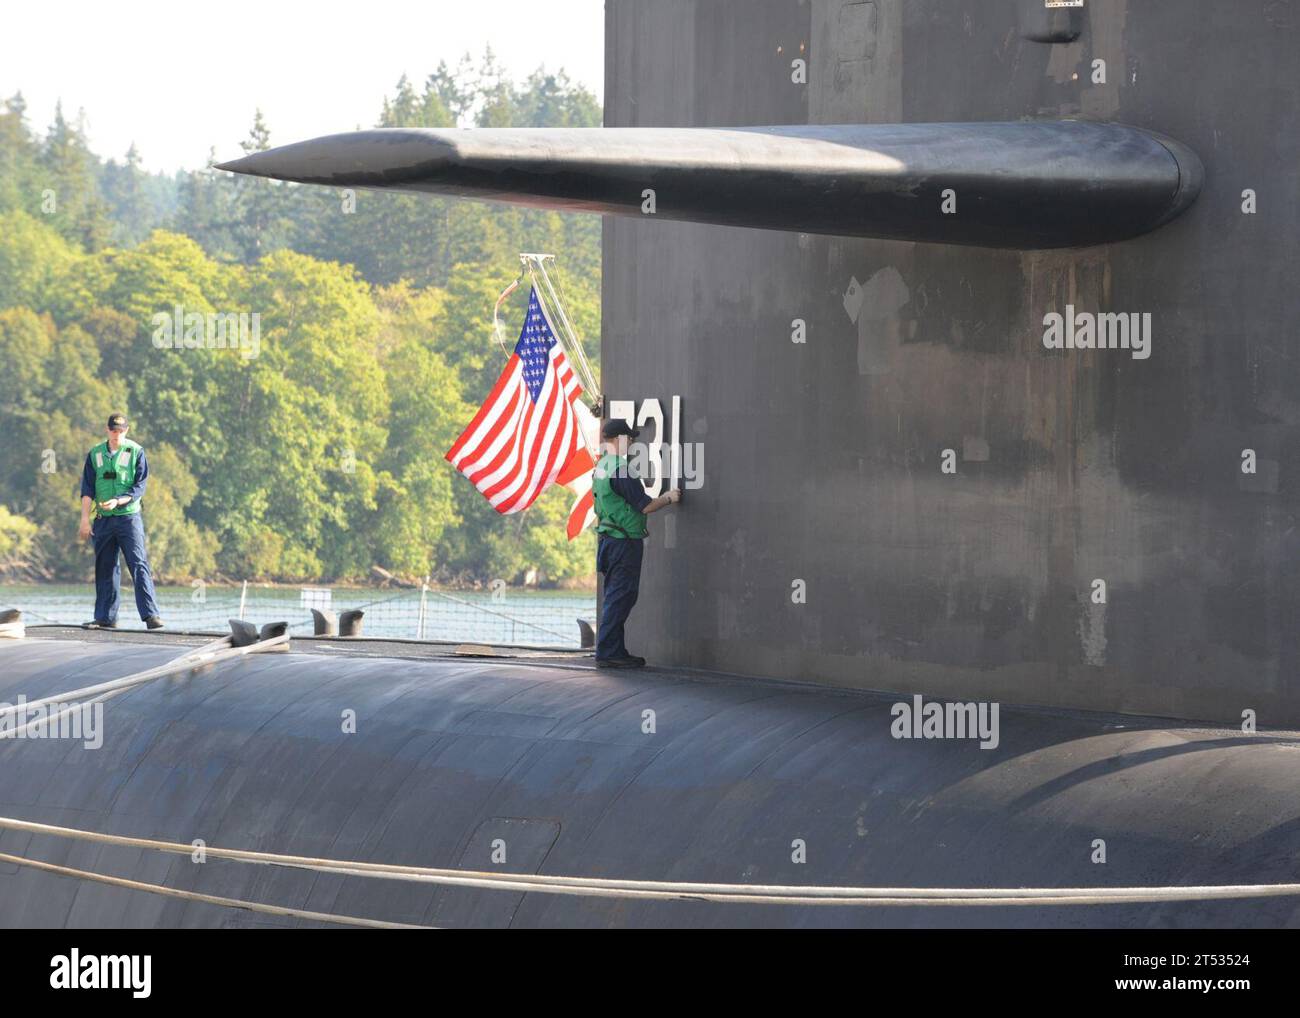 0907311325N-005 BANGOR, Wash. (July 31, 2009) A Sailor assigned to the Ohio class ballistic missile submarine USS Alabama (SSBN 731) places the hull number on the sail of Alabama after tying up at the Delta Pier at Naval Base Kitsap. (U.S. Navy Stock Photo